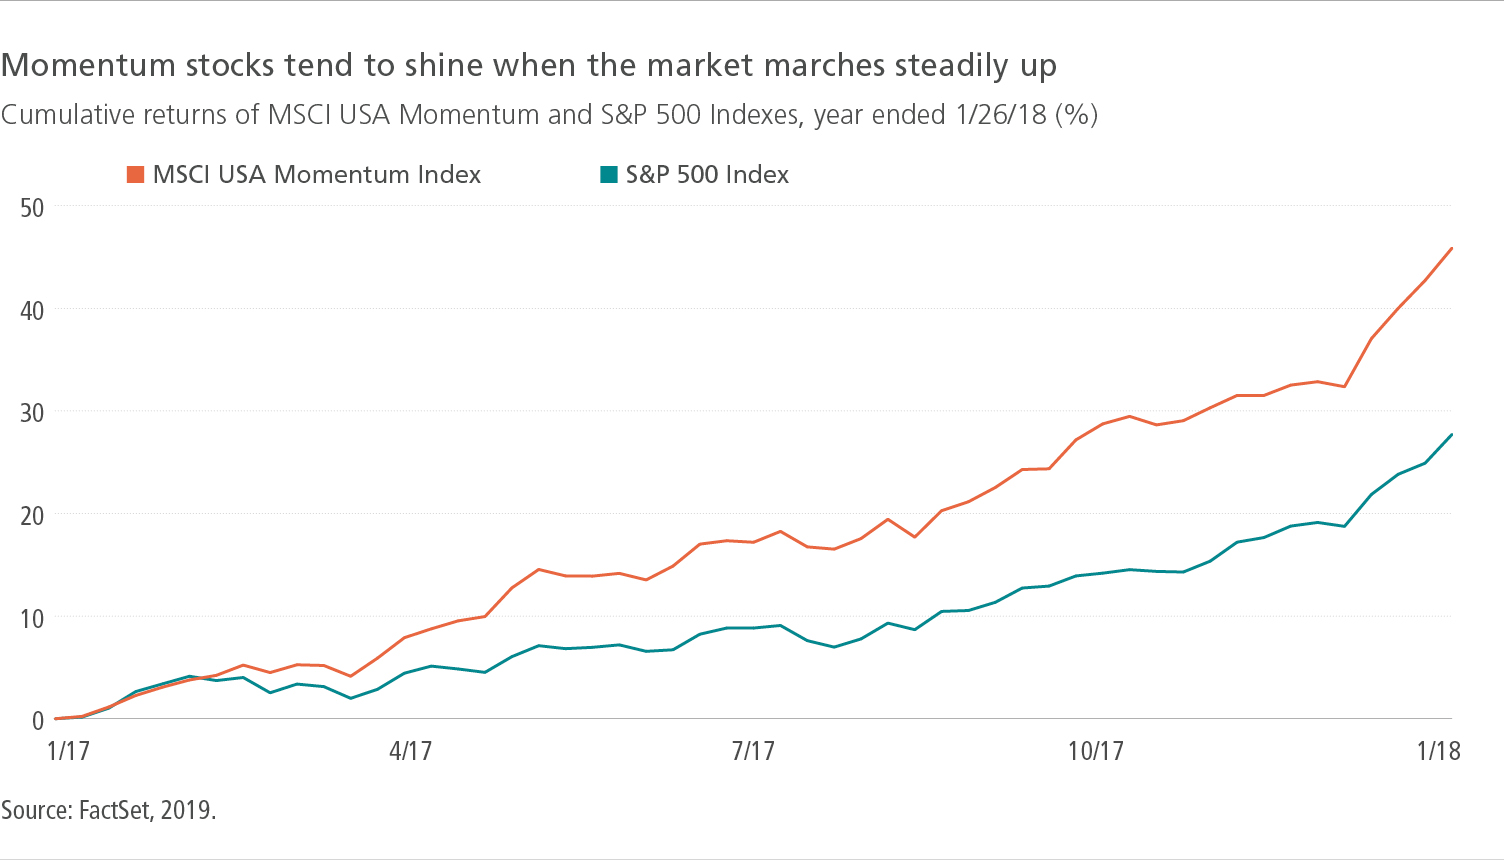 Momentum stocks shine when the market marches up